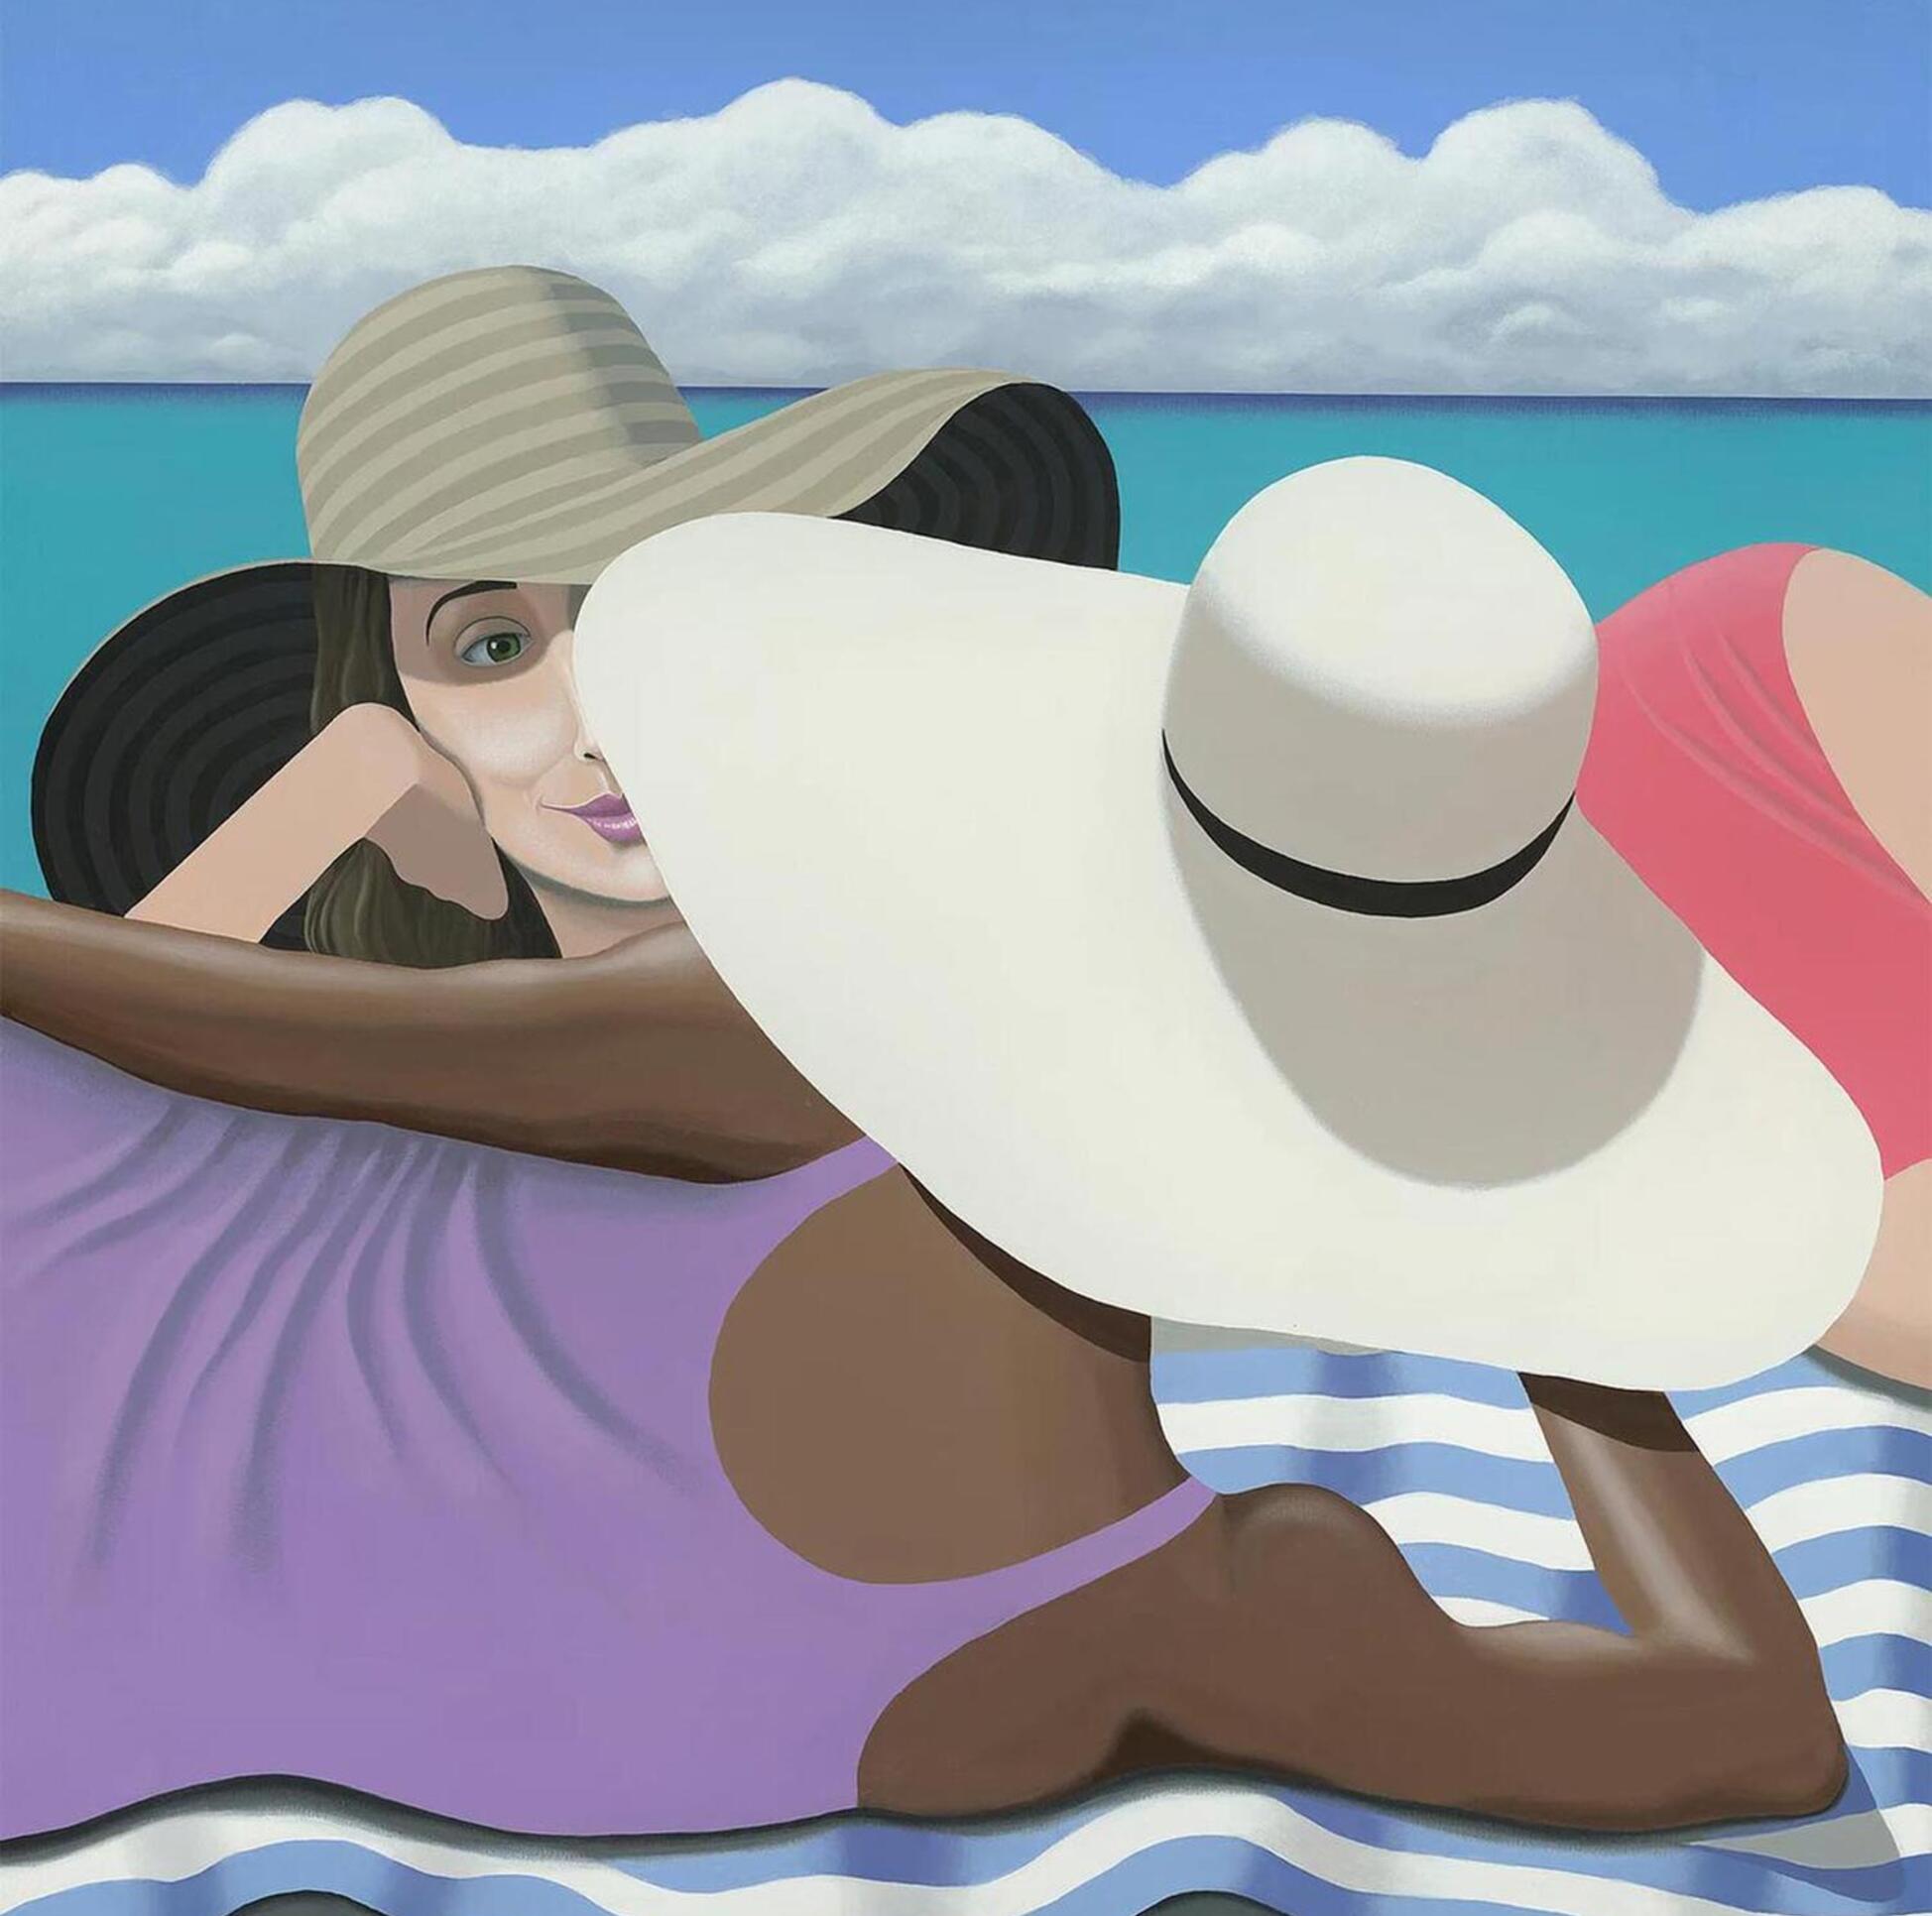 Painting of two people on a beach ; George Halvorson